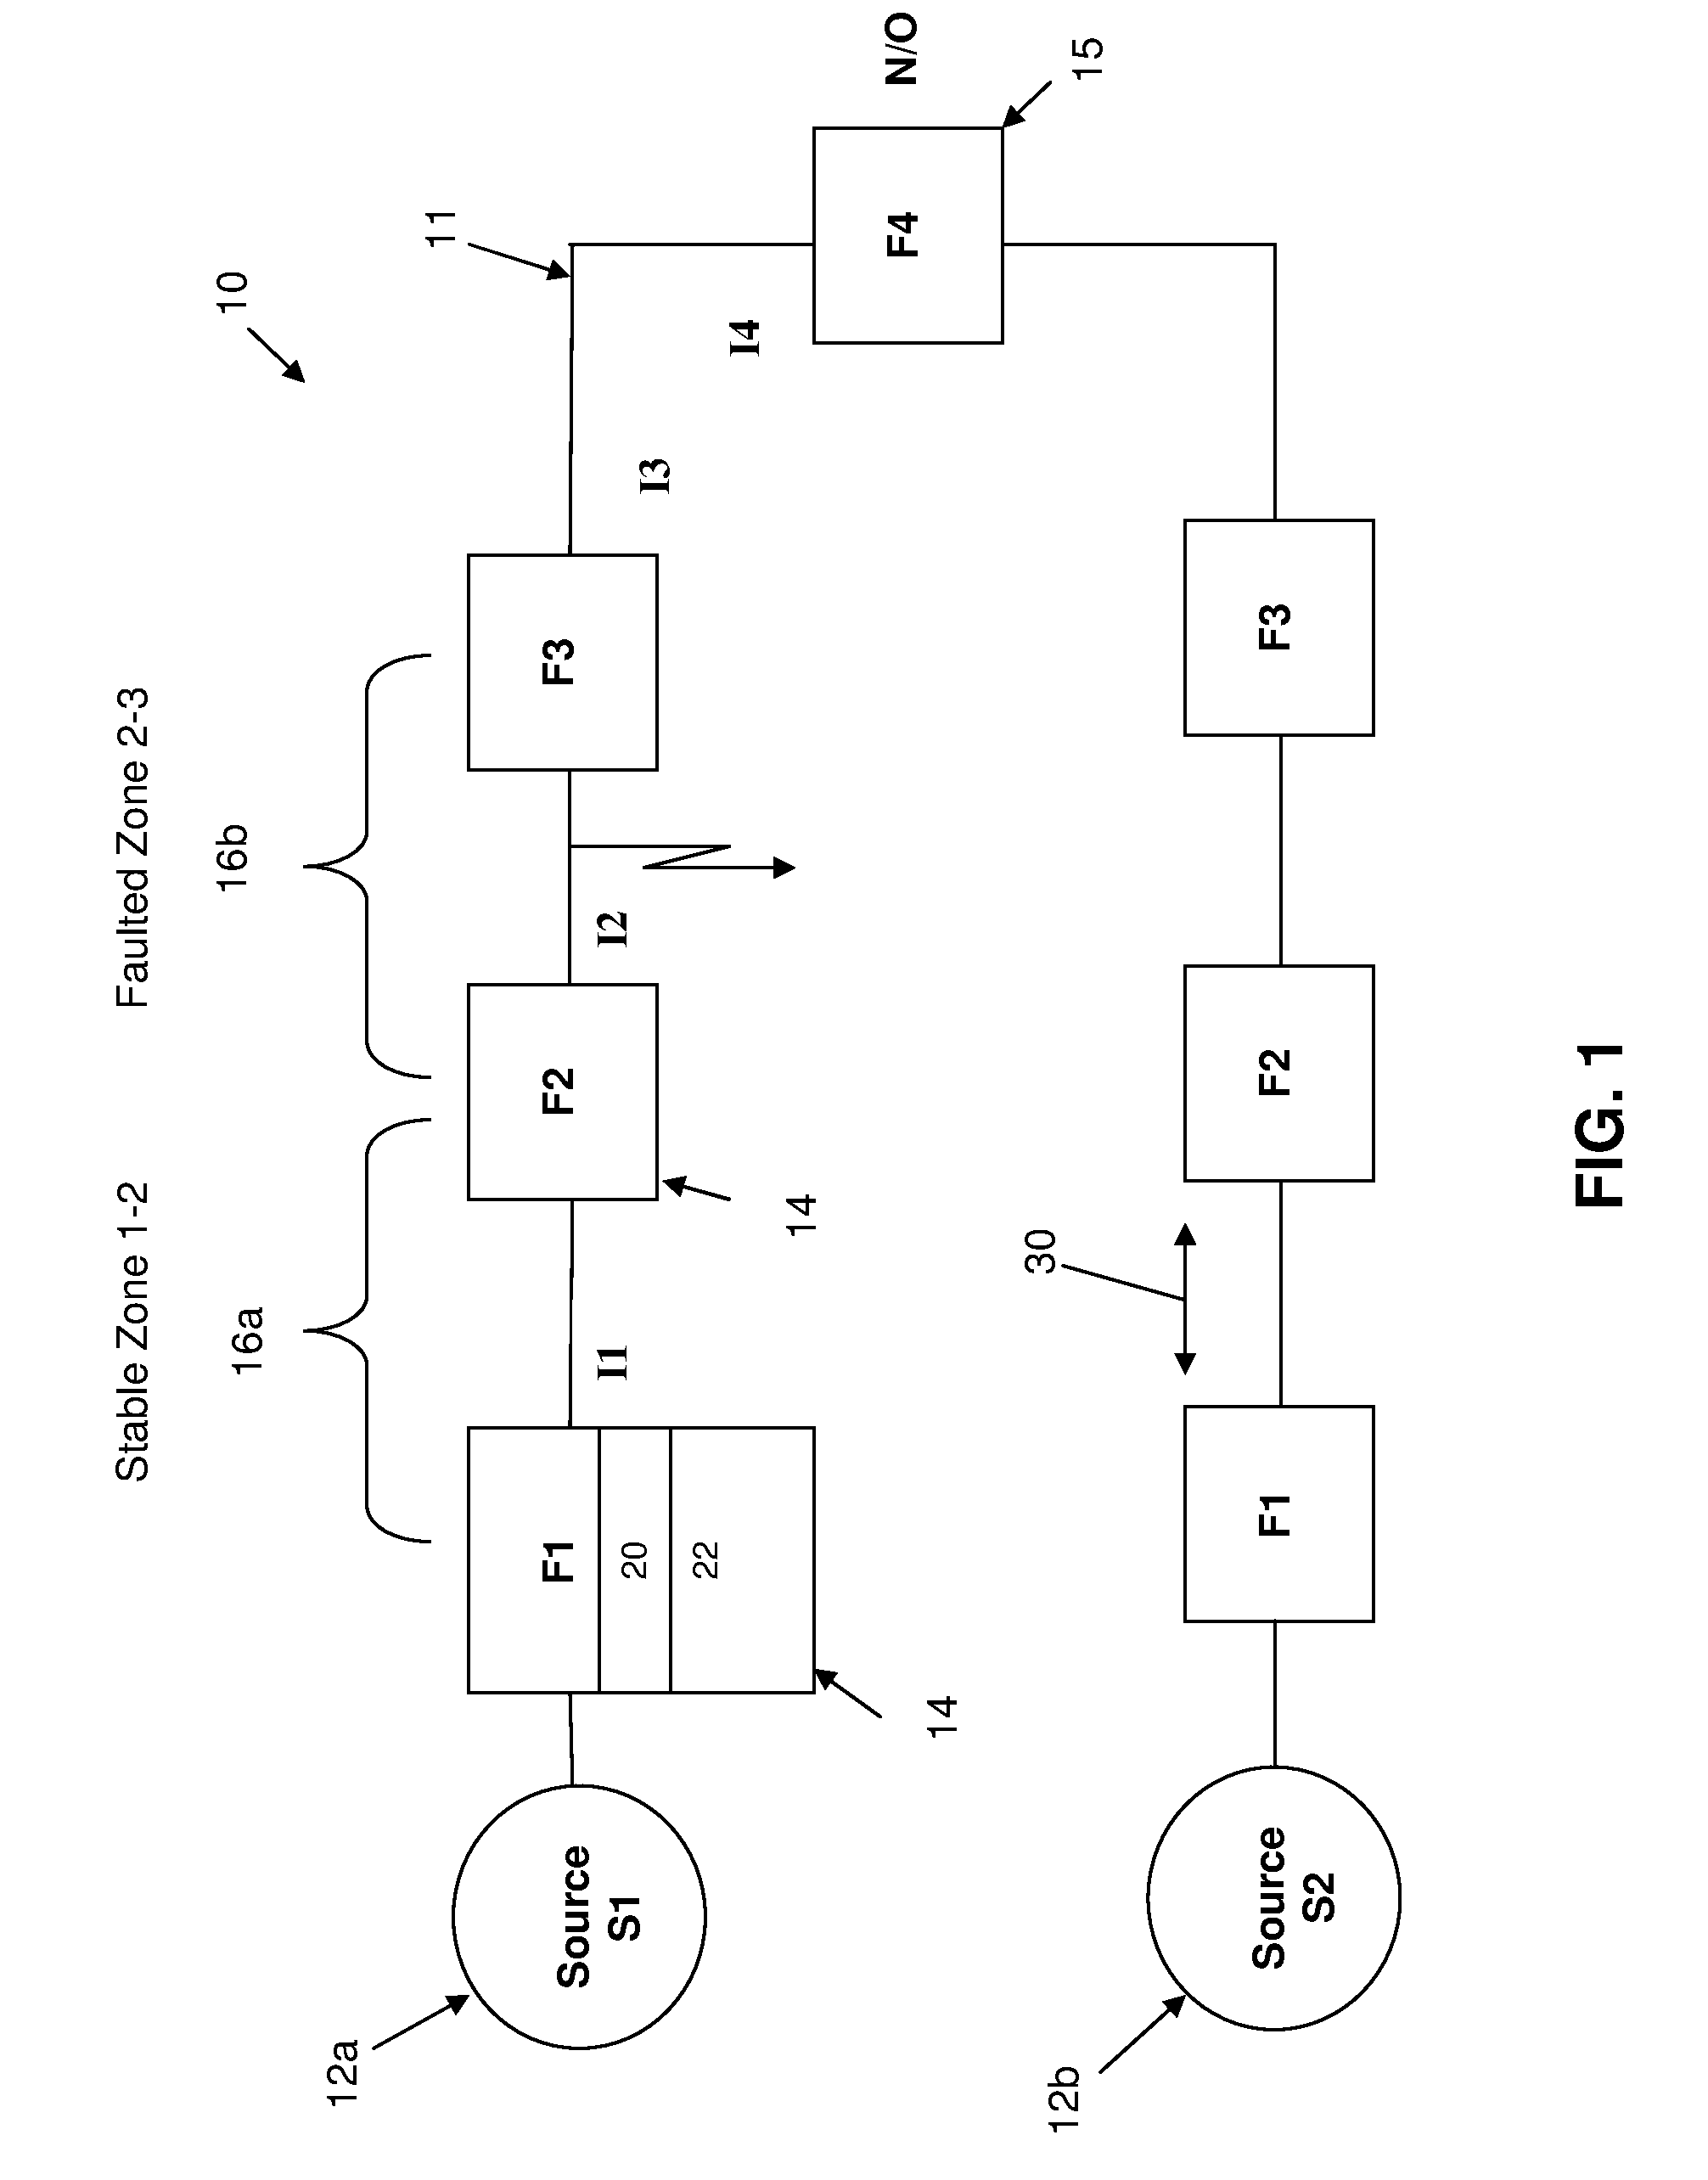 Method and apparatus for high-speed fault detection in distribution systems